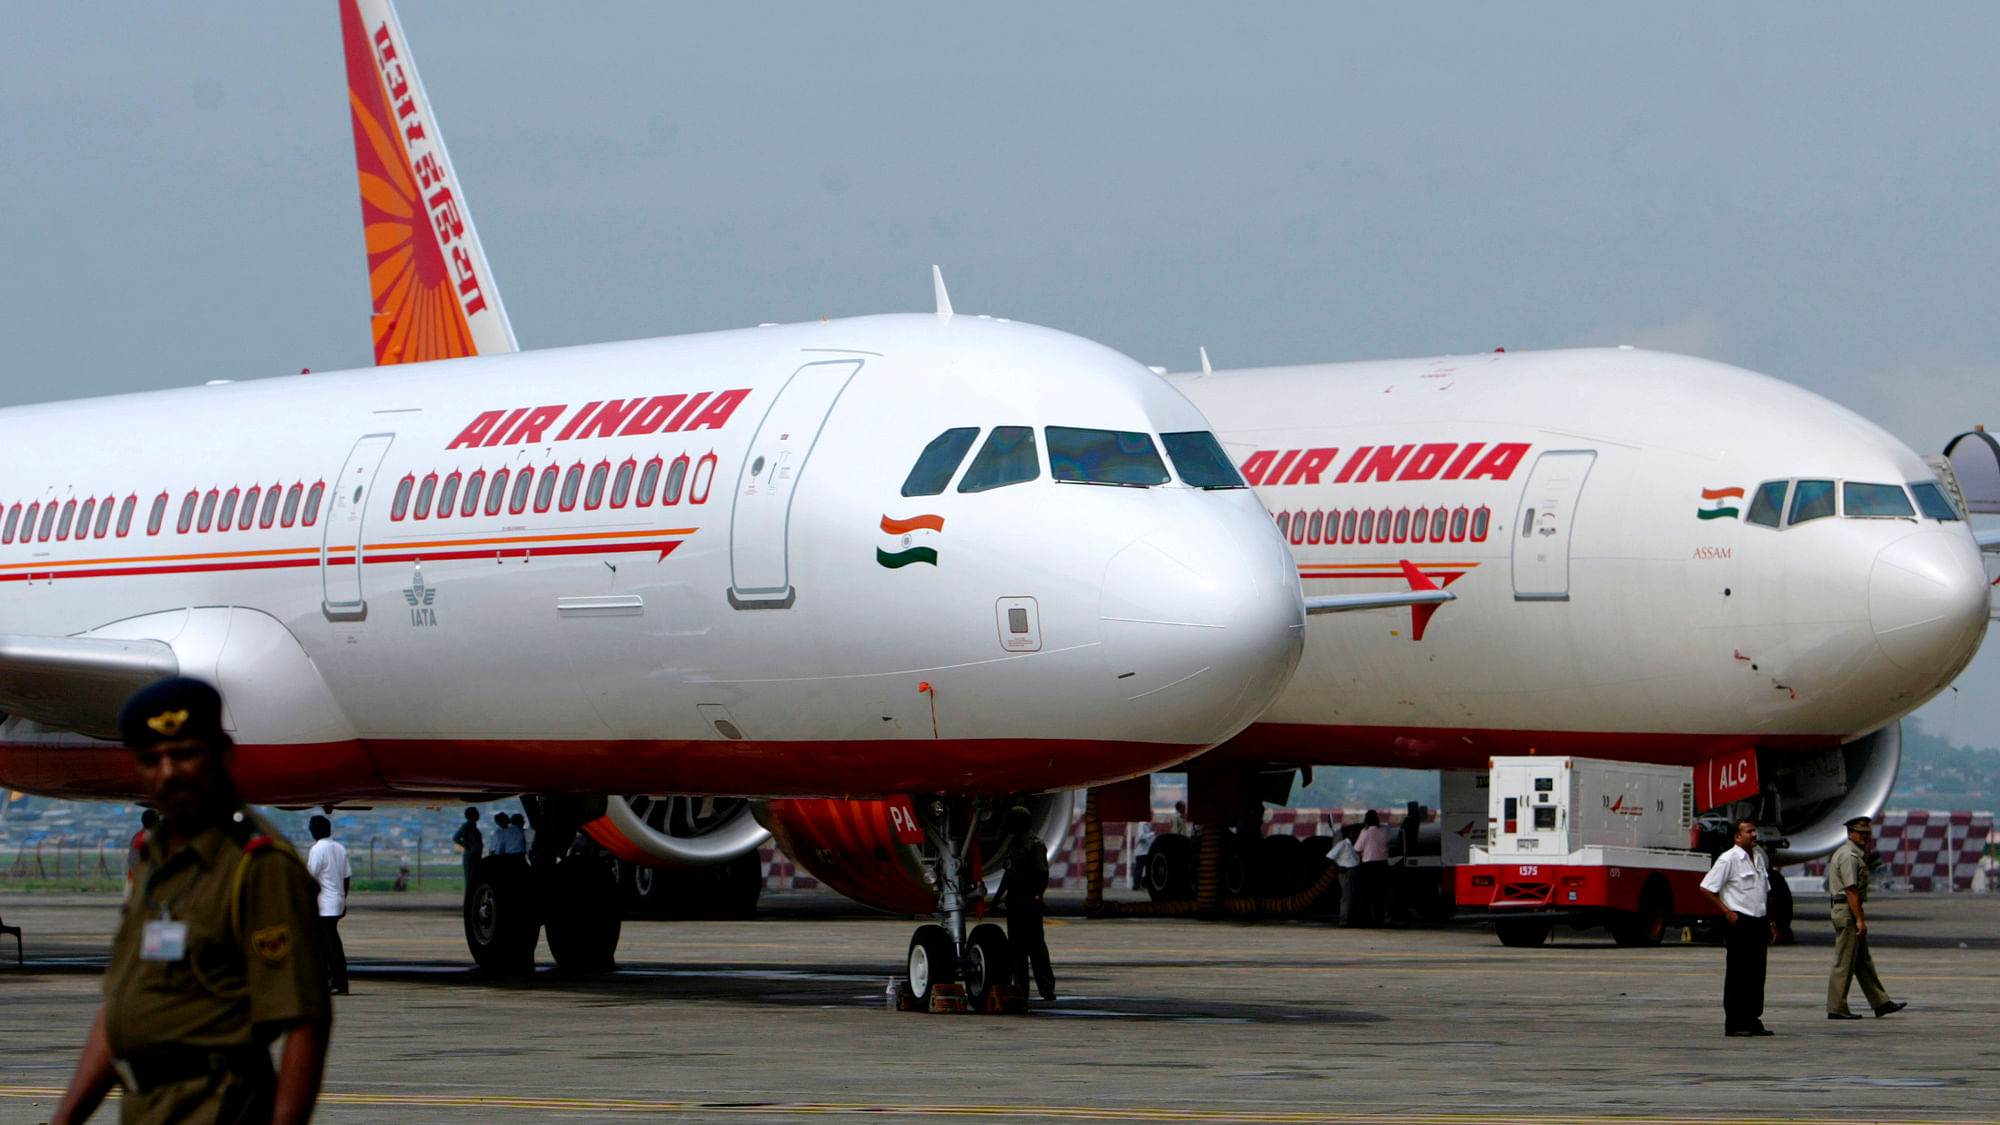 A Delhi-bound Air India flight from Milan had to return to the airport in Italy within 30 minutes of take-off after a passenger tried to enter the cockpit. Representative image only.